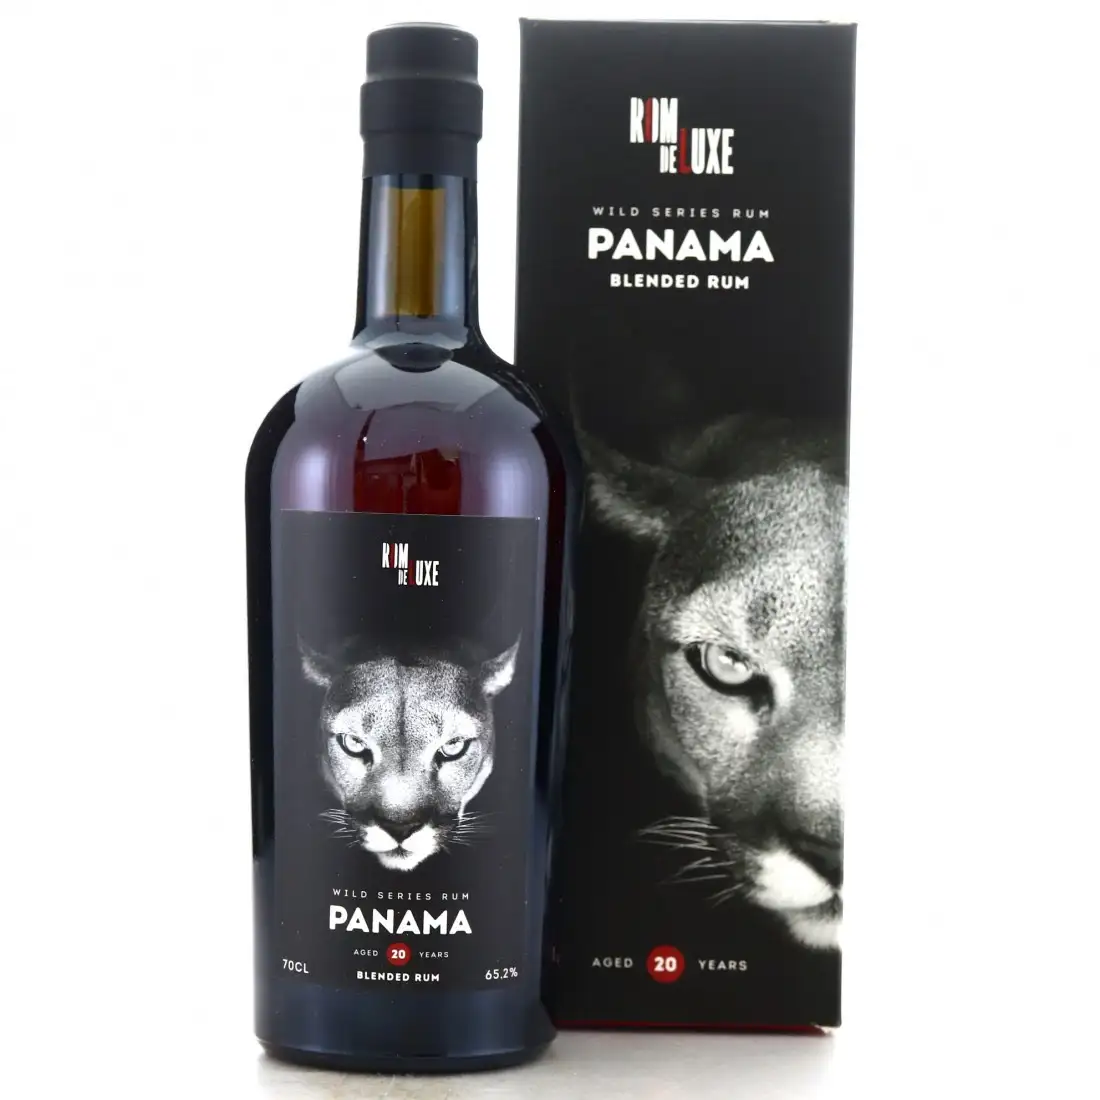 Image of the front of the bottle of the rum Wild Series Rum Panama No. 3